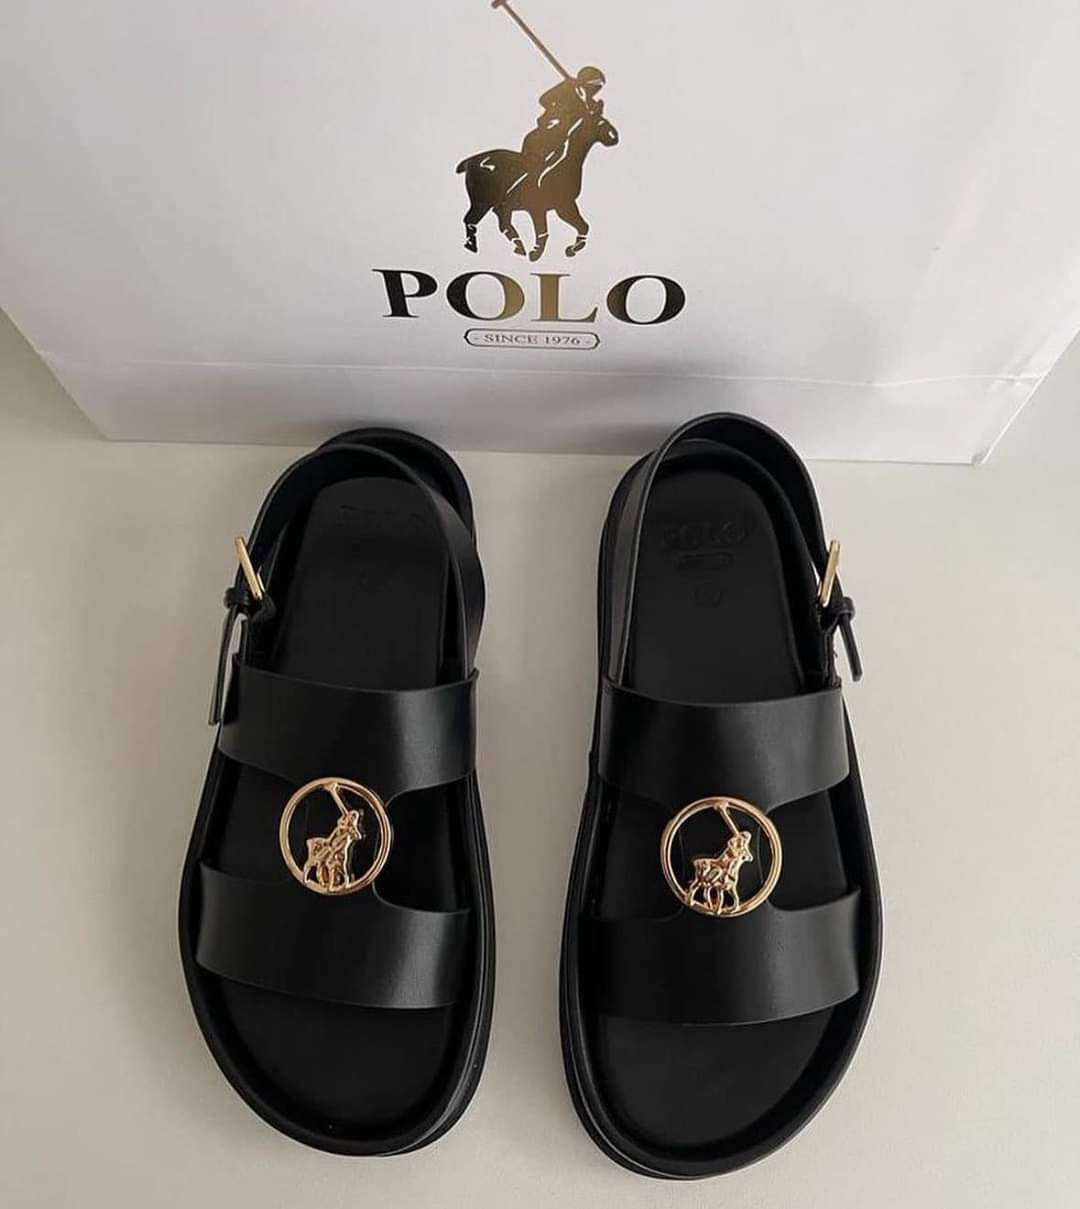 PREORDERS ONLY ! NO REFUNDS! JUNE DELIVERY - LIMITED STOCK NO REFUNDS Polo Posh Moulded Slide Ladies Shoe